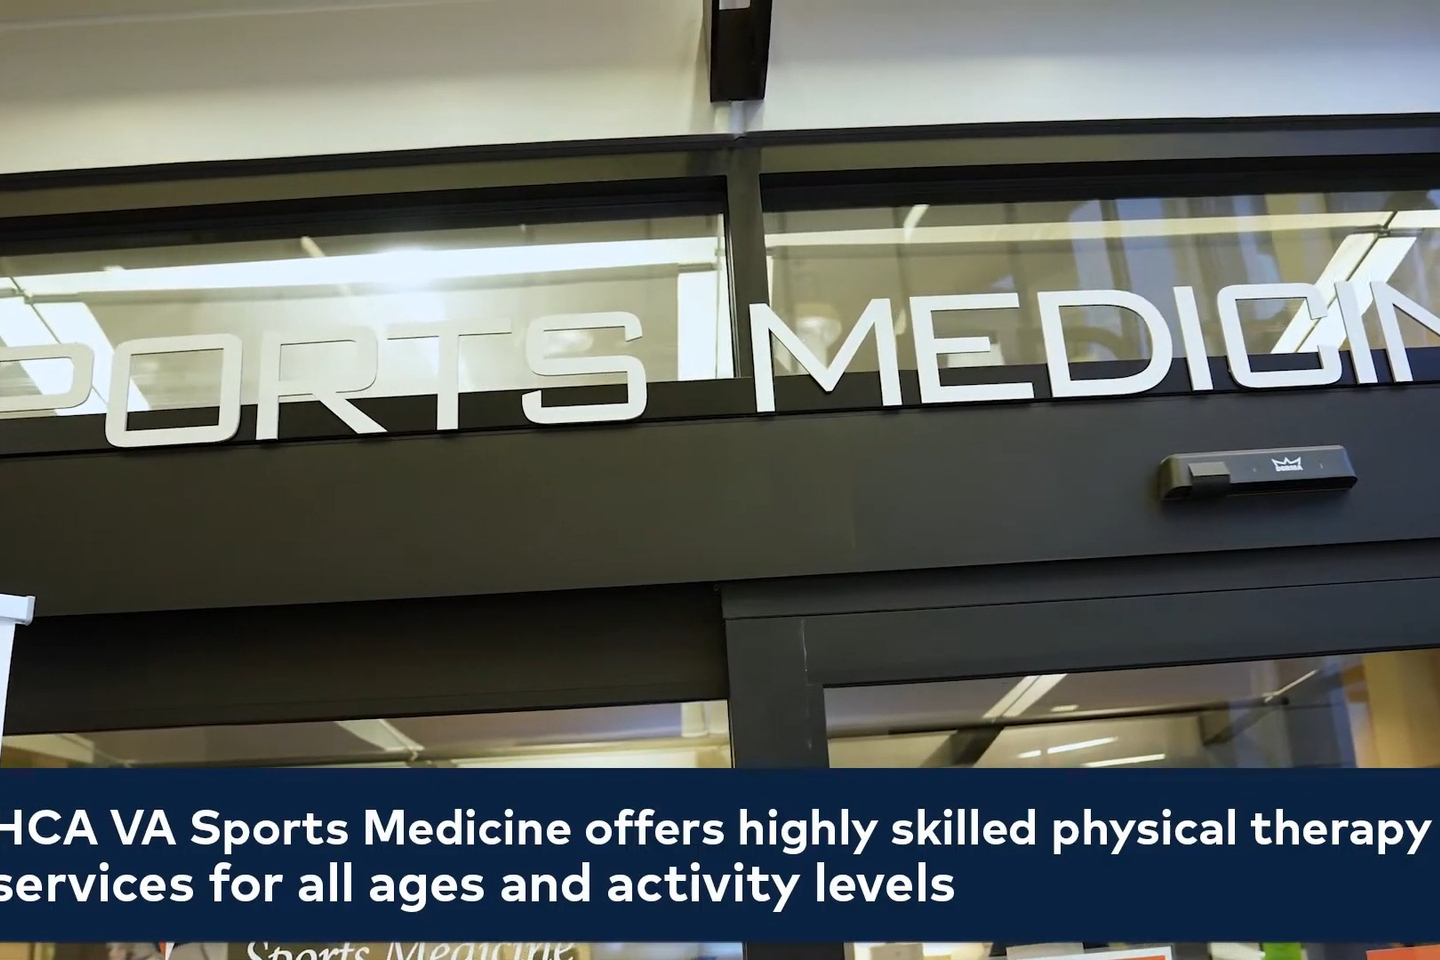 Exterior of Chippenham Hospital Sports Medicine center. Text at the bottom of the screen reads, "HCA VA Sports Medicine offers highly skilled physical therapy services for all ages and activity levels."